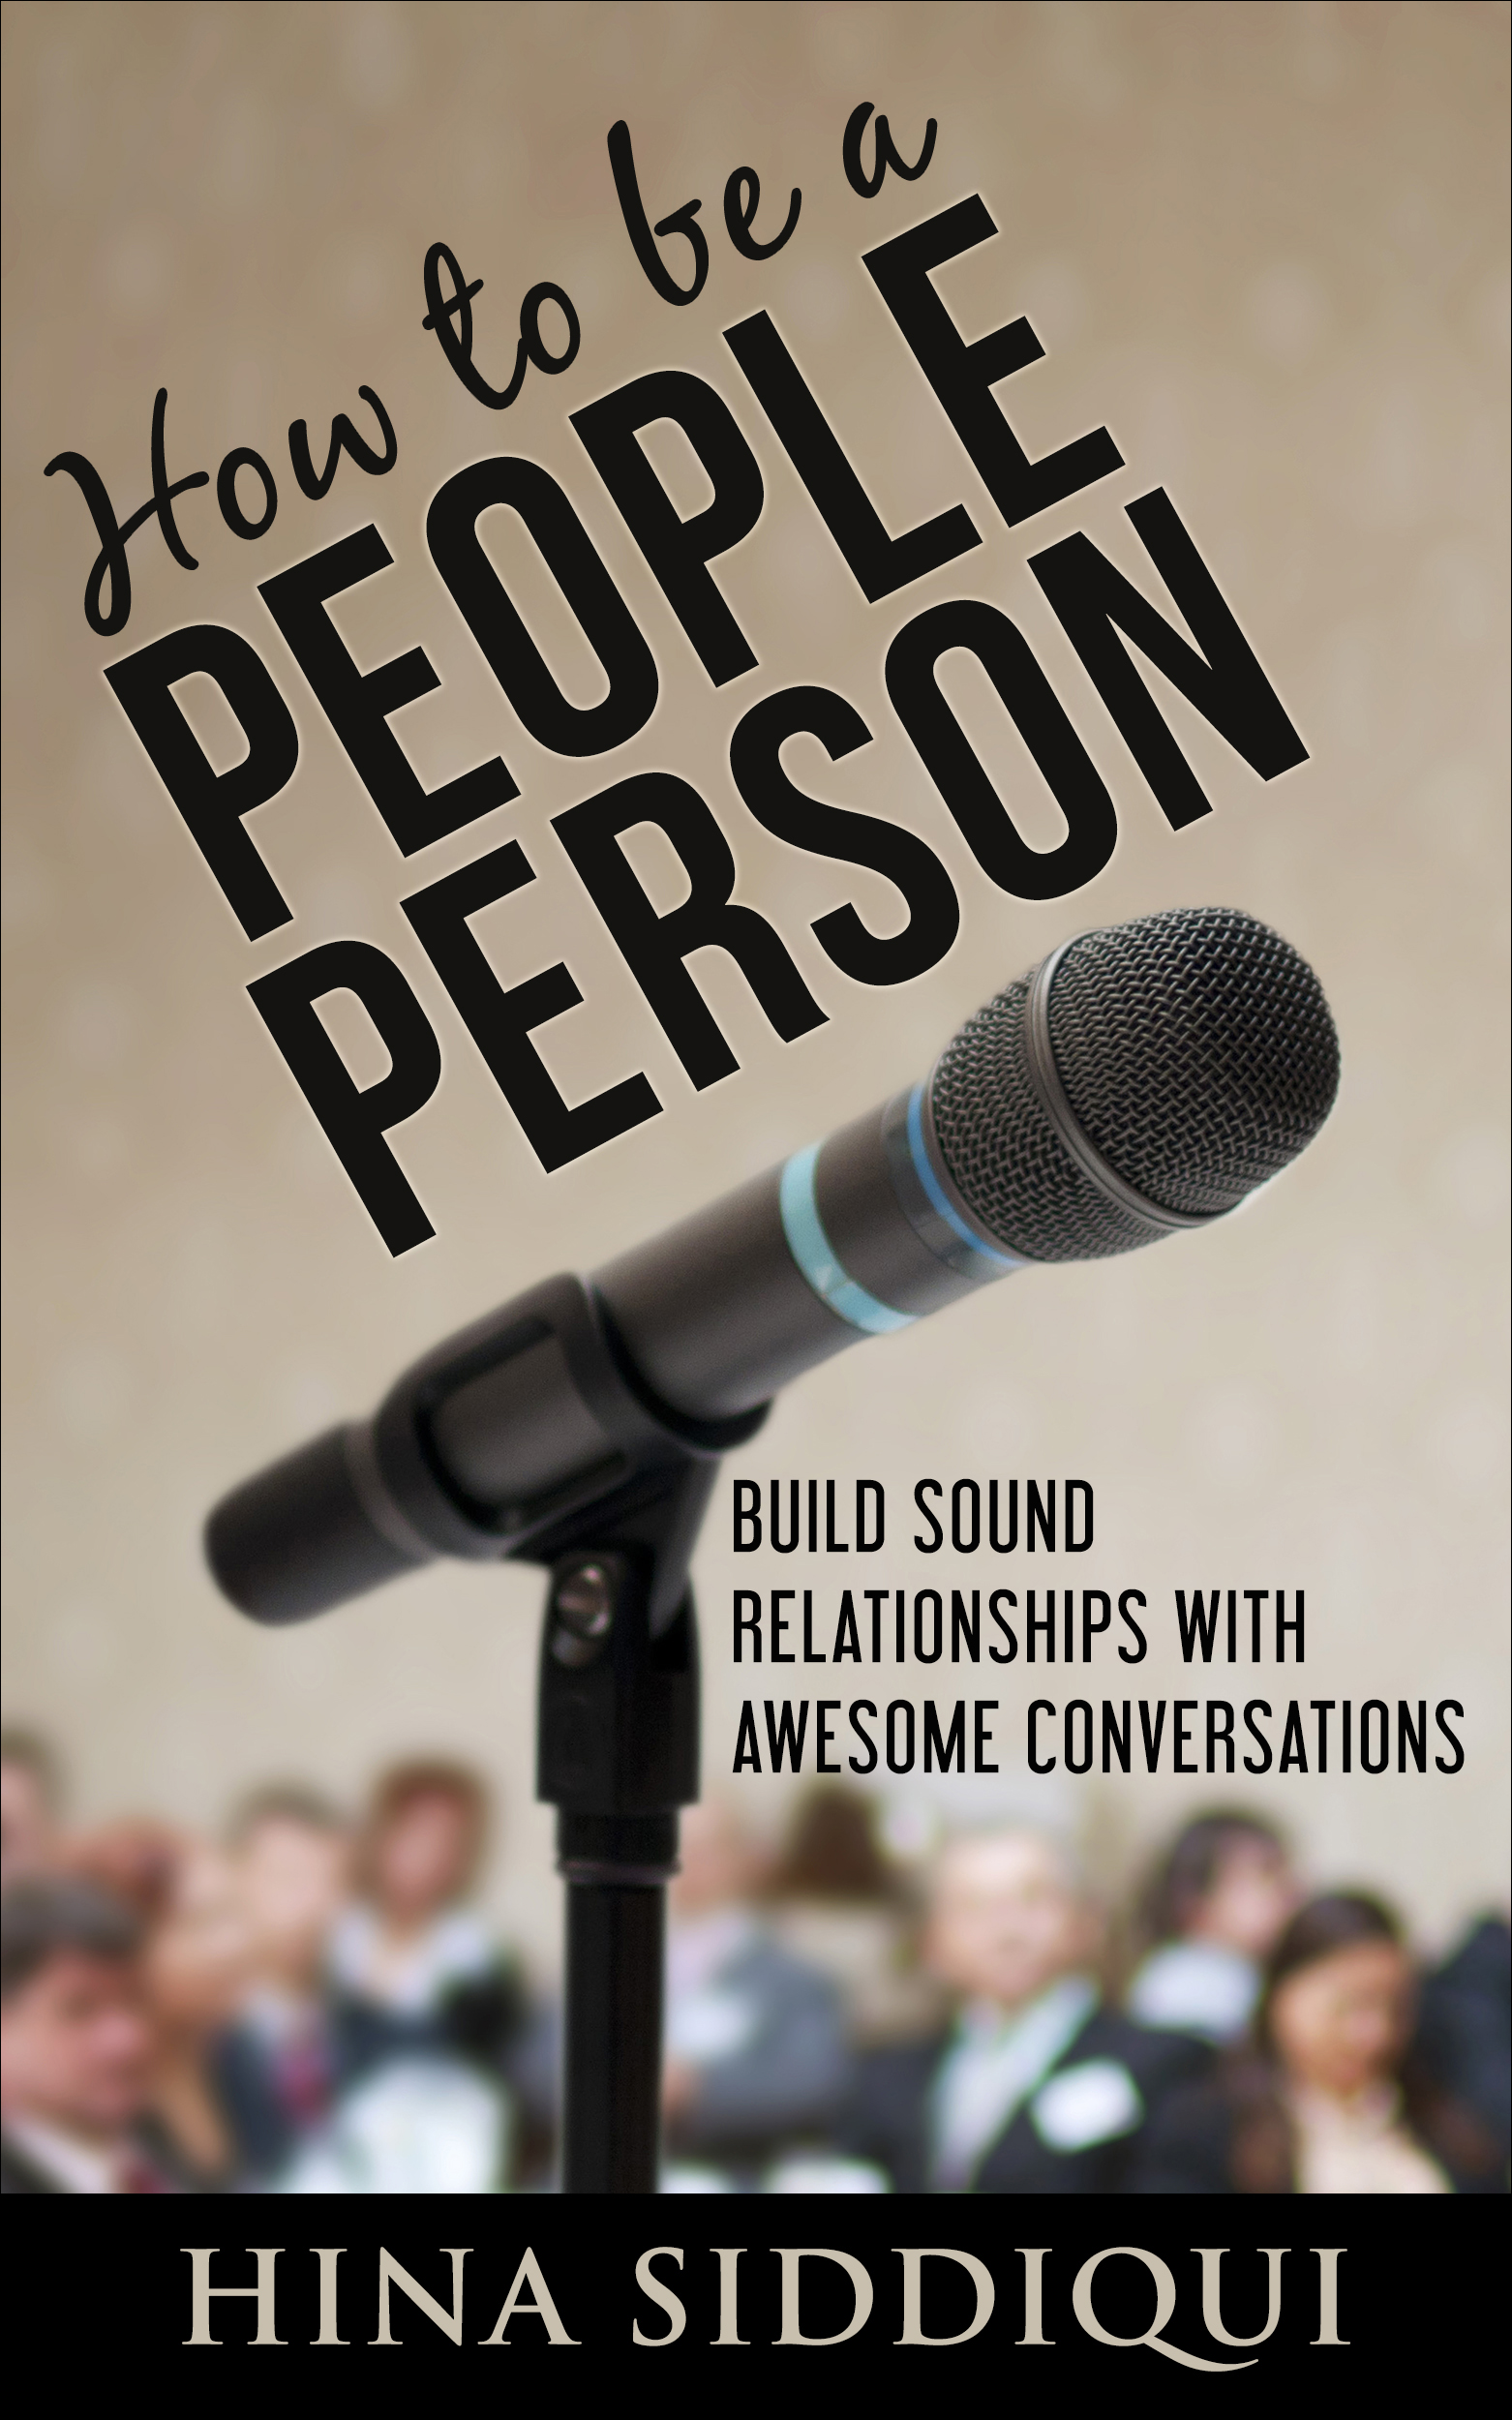 FREE: How to be a People Person: Build Sound Relationships with Awesome Conversations by Hina Siddiqui